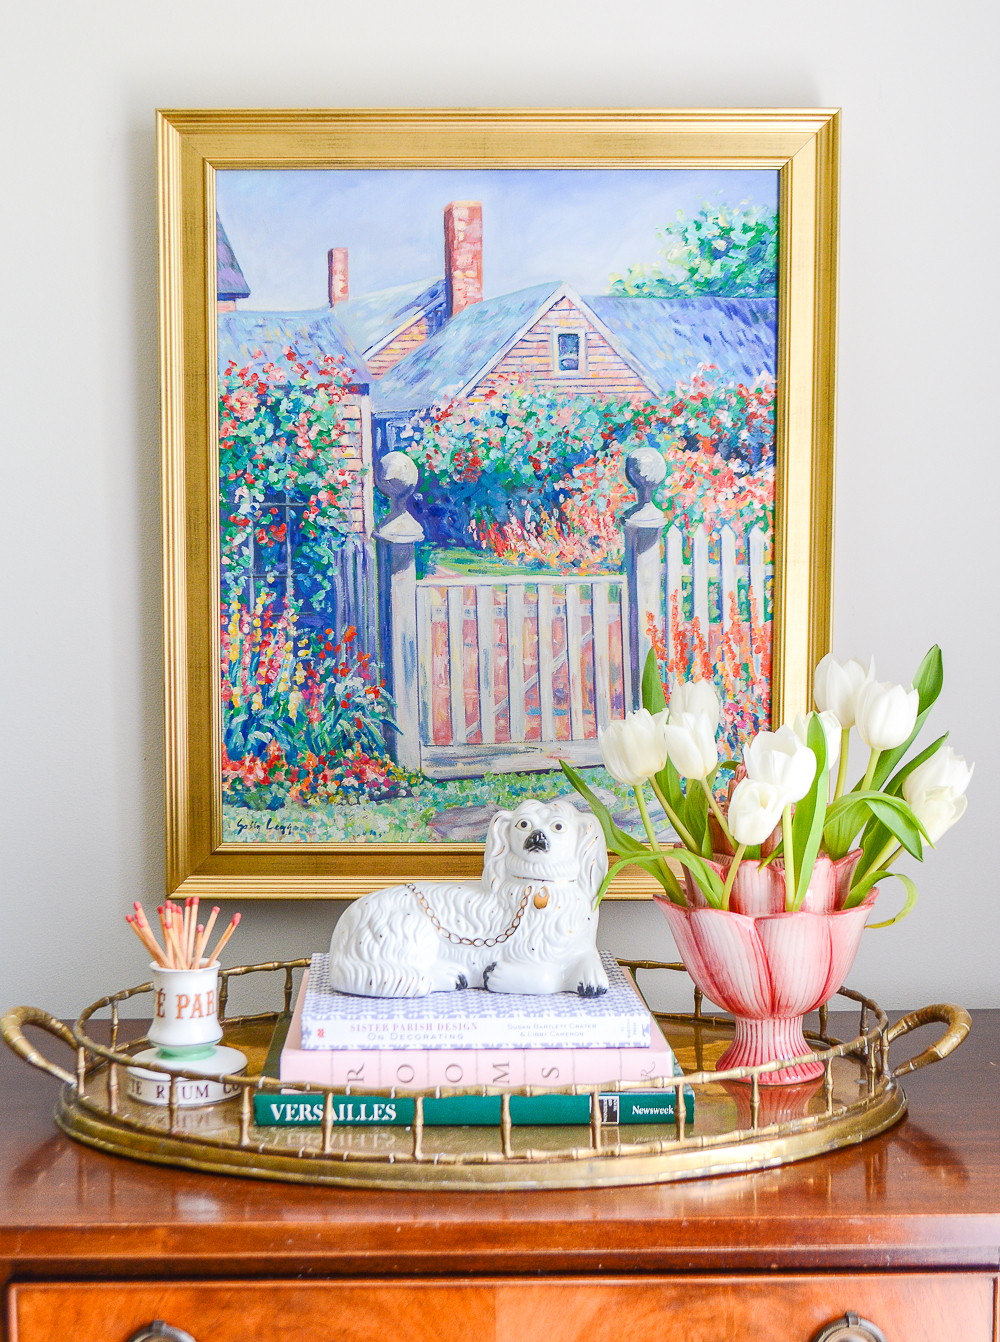 Use trays and books in your vignettes to achieve a layered look